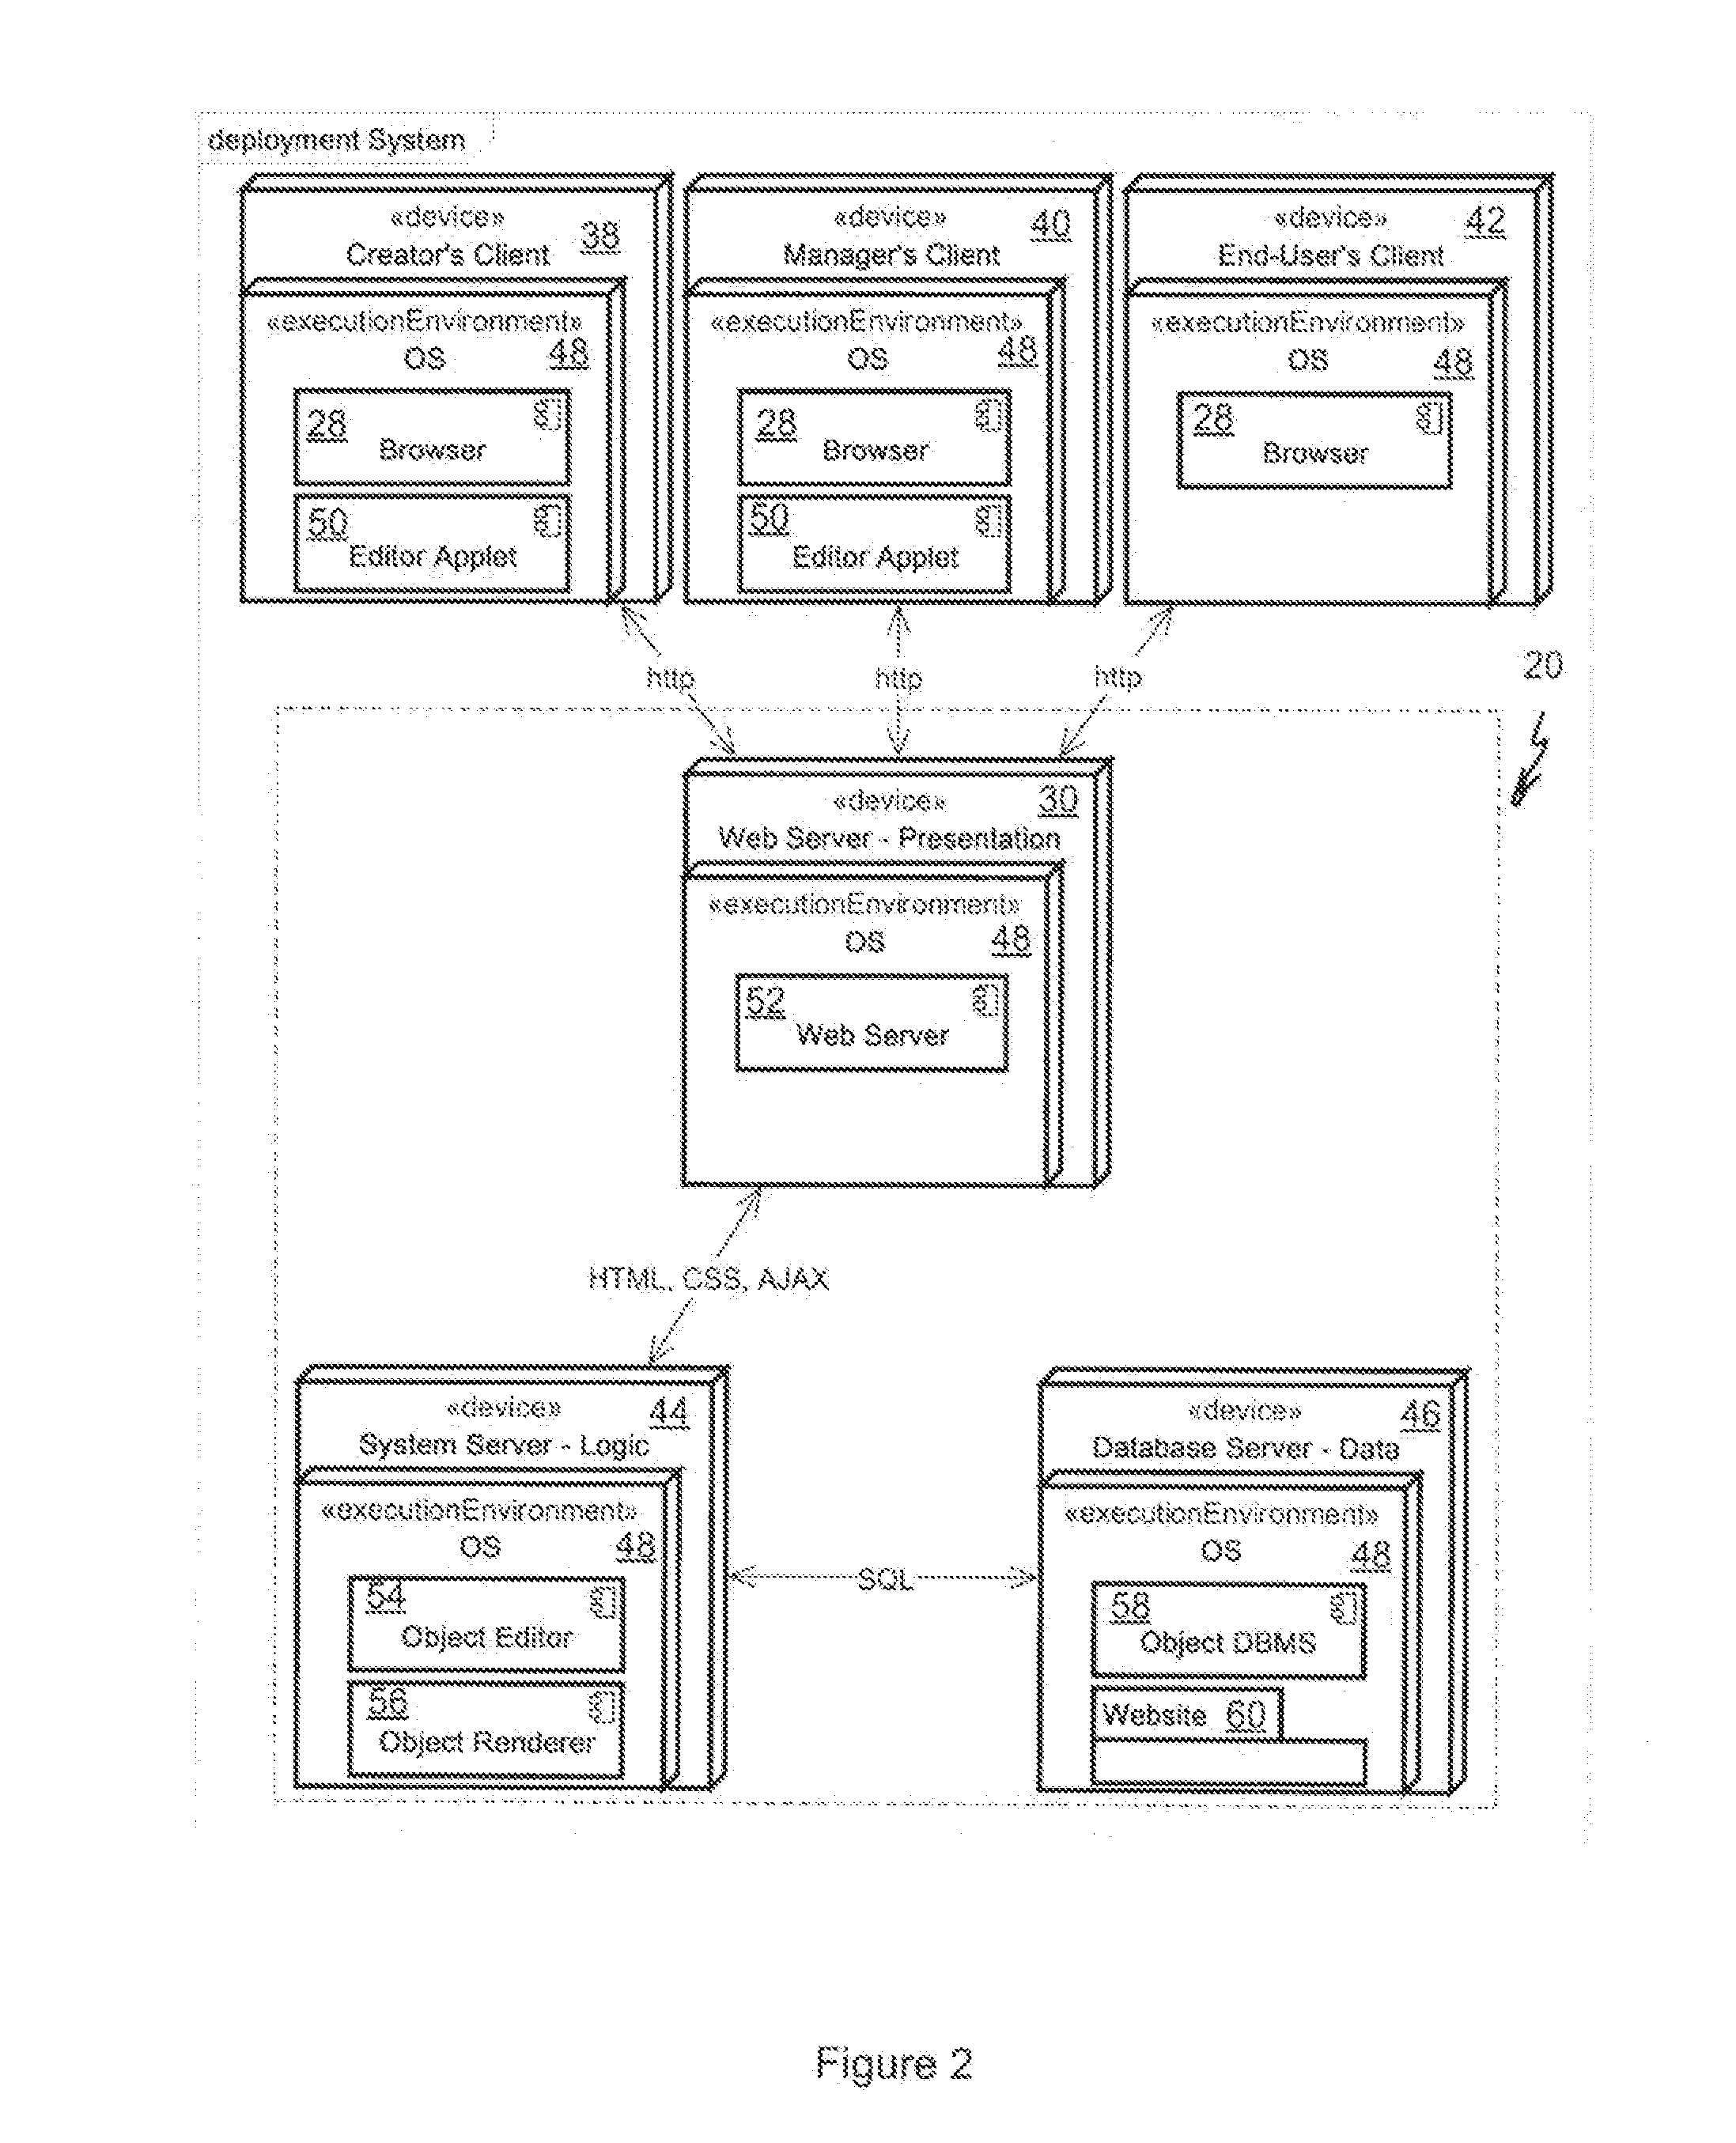 Object-oriented system for creating and managing websites and their content